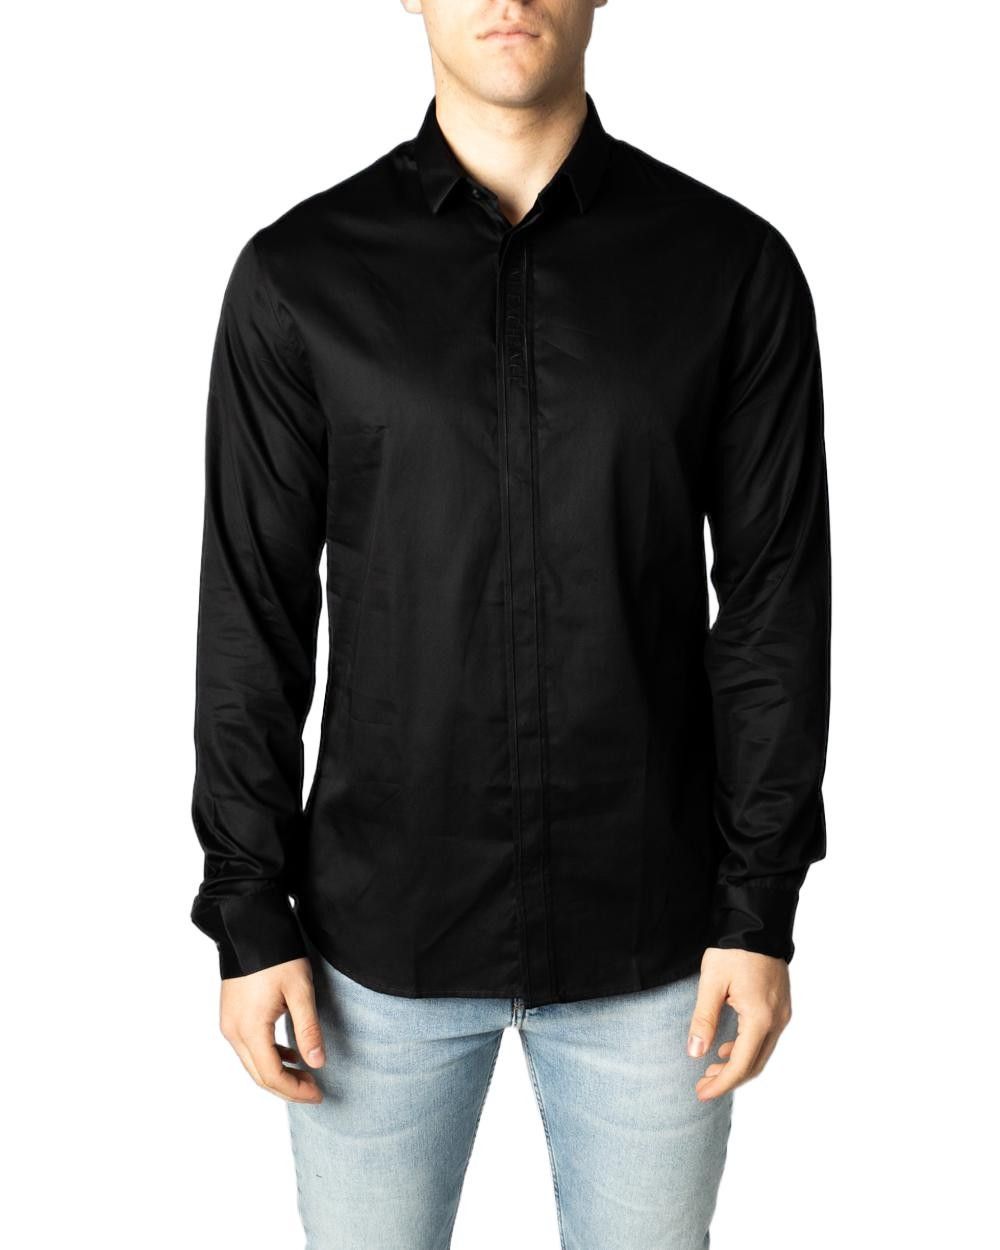 Brand: Armani Exchange
Gender: Men
Type: Shirts
Season: Spring/Summer

PRODUCT DETAIL
• Color: black
• Pattern: plain
• Fastening: buttons
• Sleeves: long
• Collar: classic

COMPOSITION AND MATERIAL
• Composition: -100% cotton 
•  Washing: machine wash at 30°